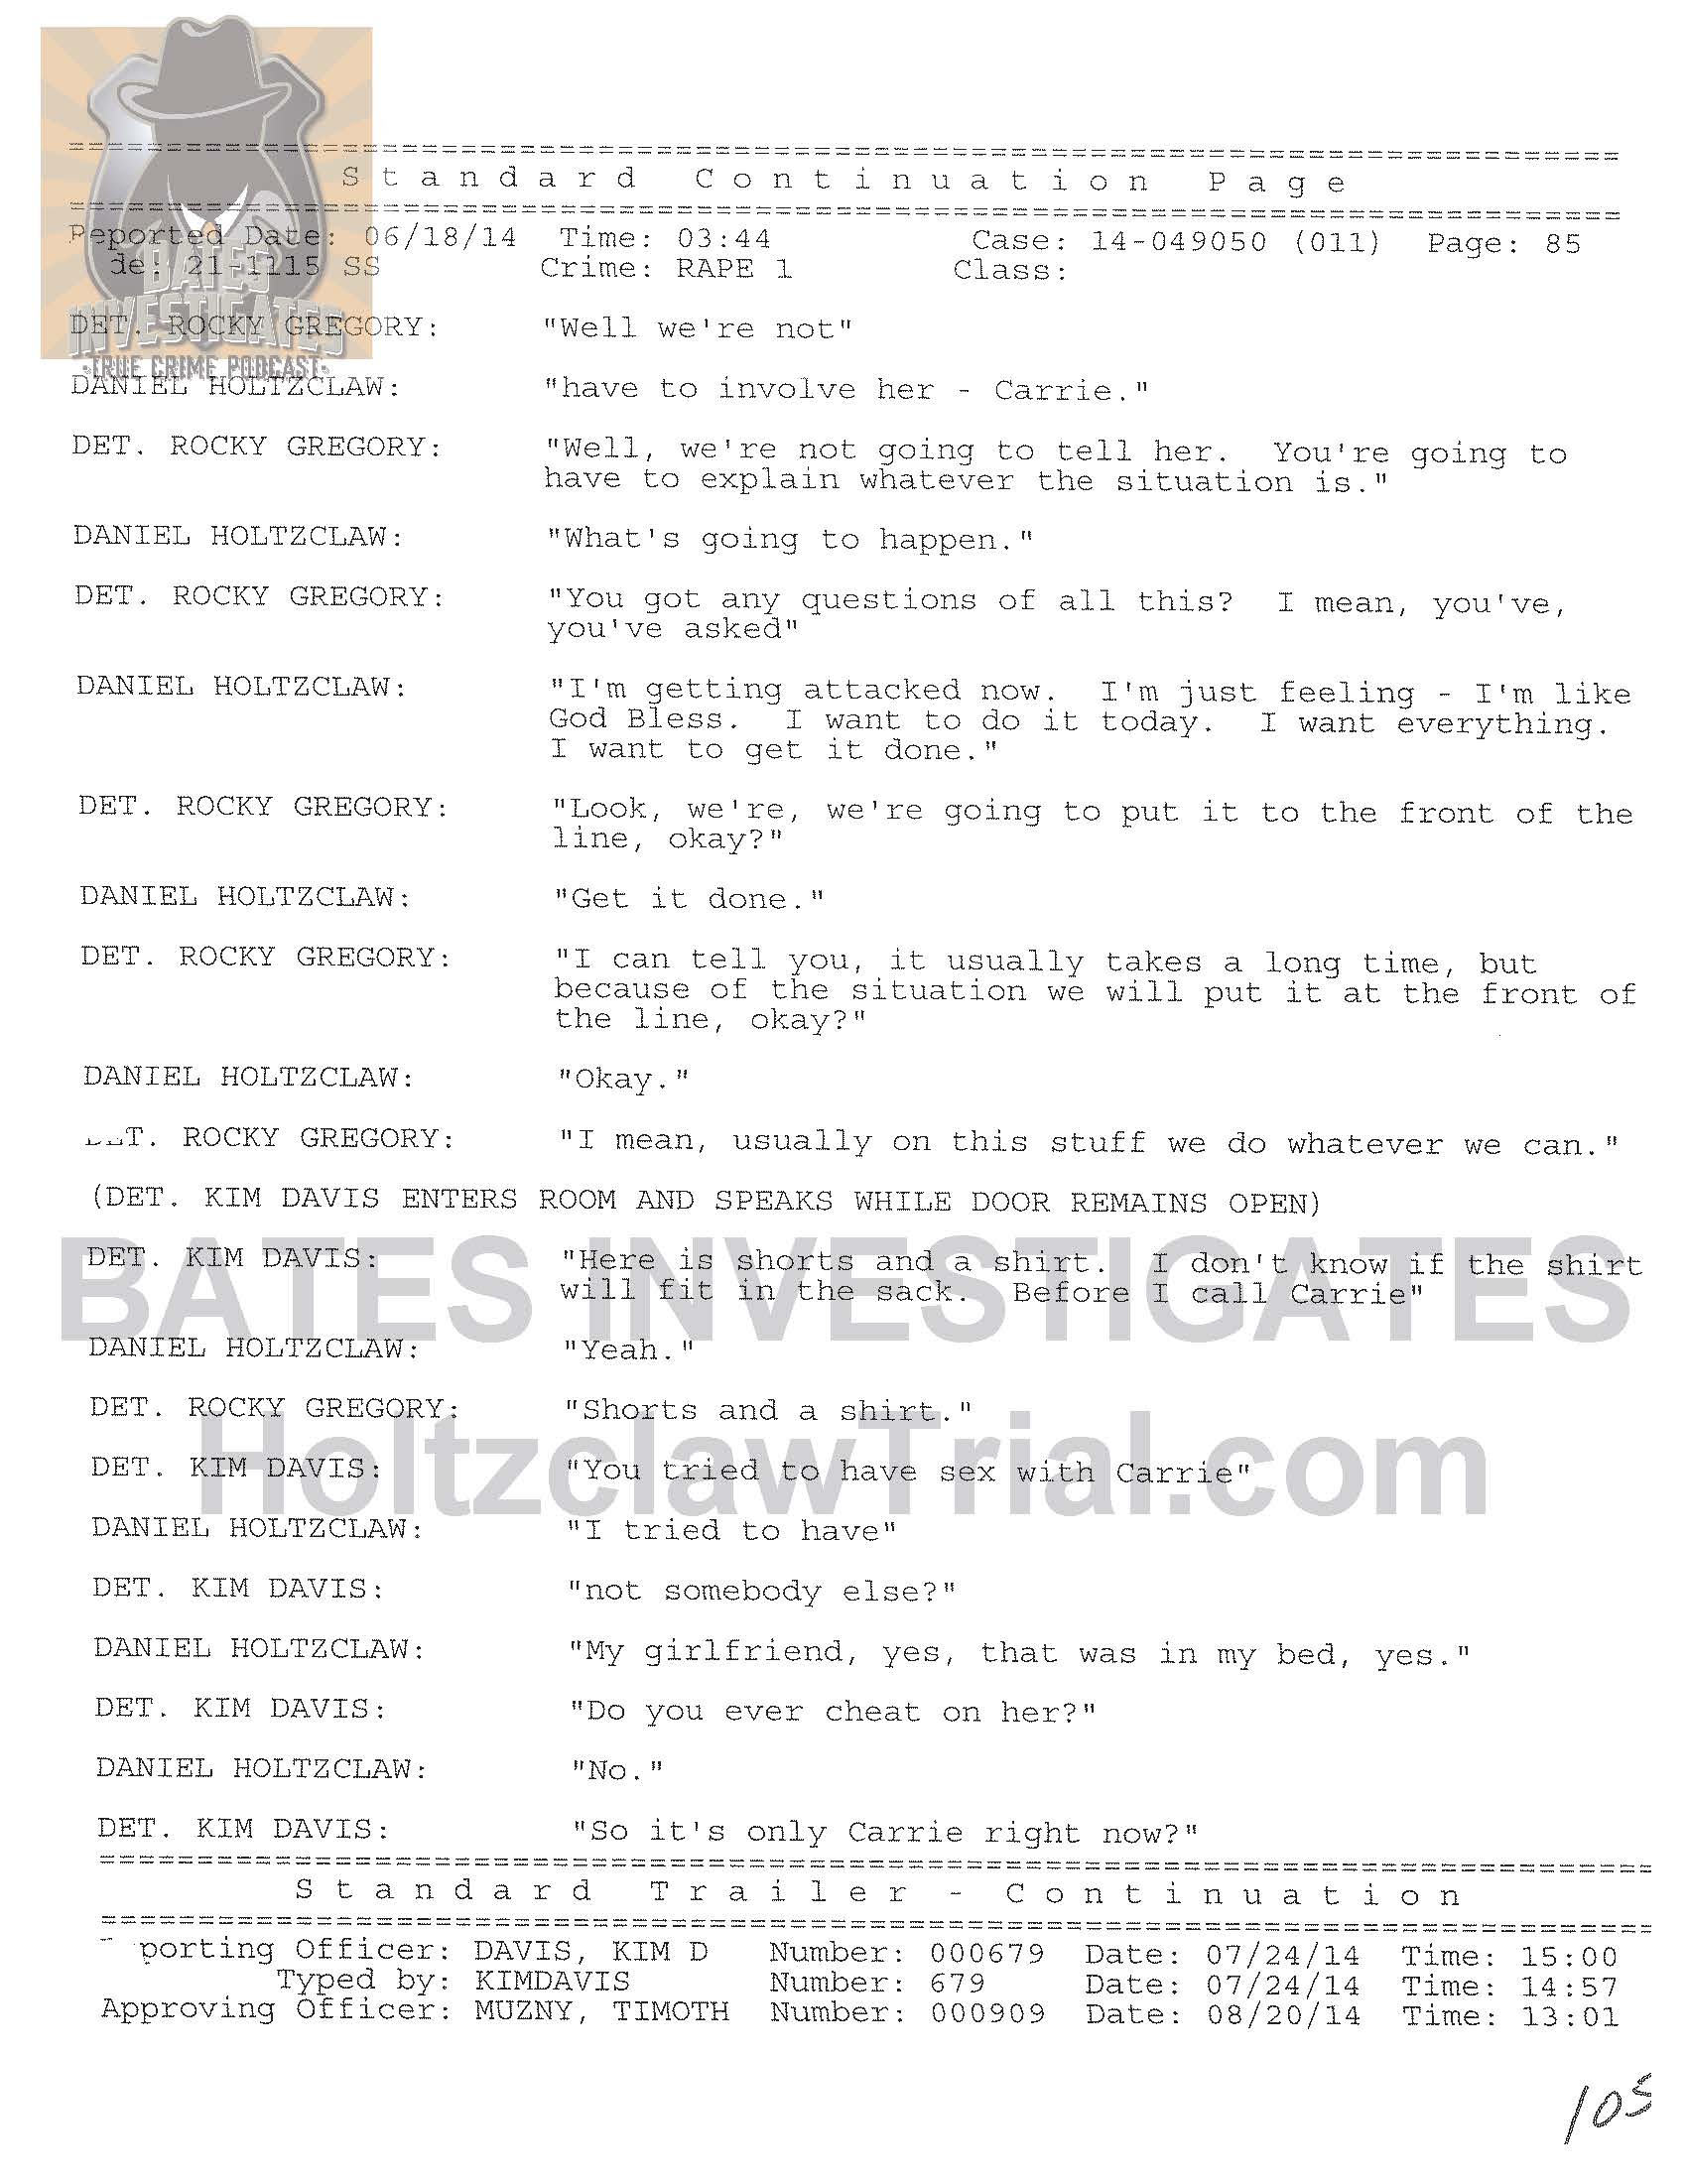 Holtzclaw Interrogation Transcript - Ep02 Redacted_Page_85.jpg